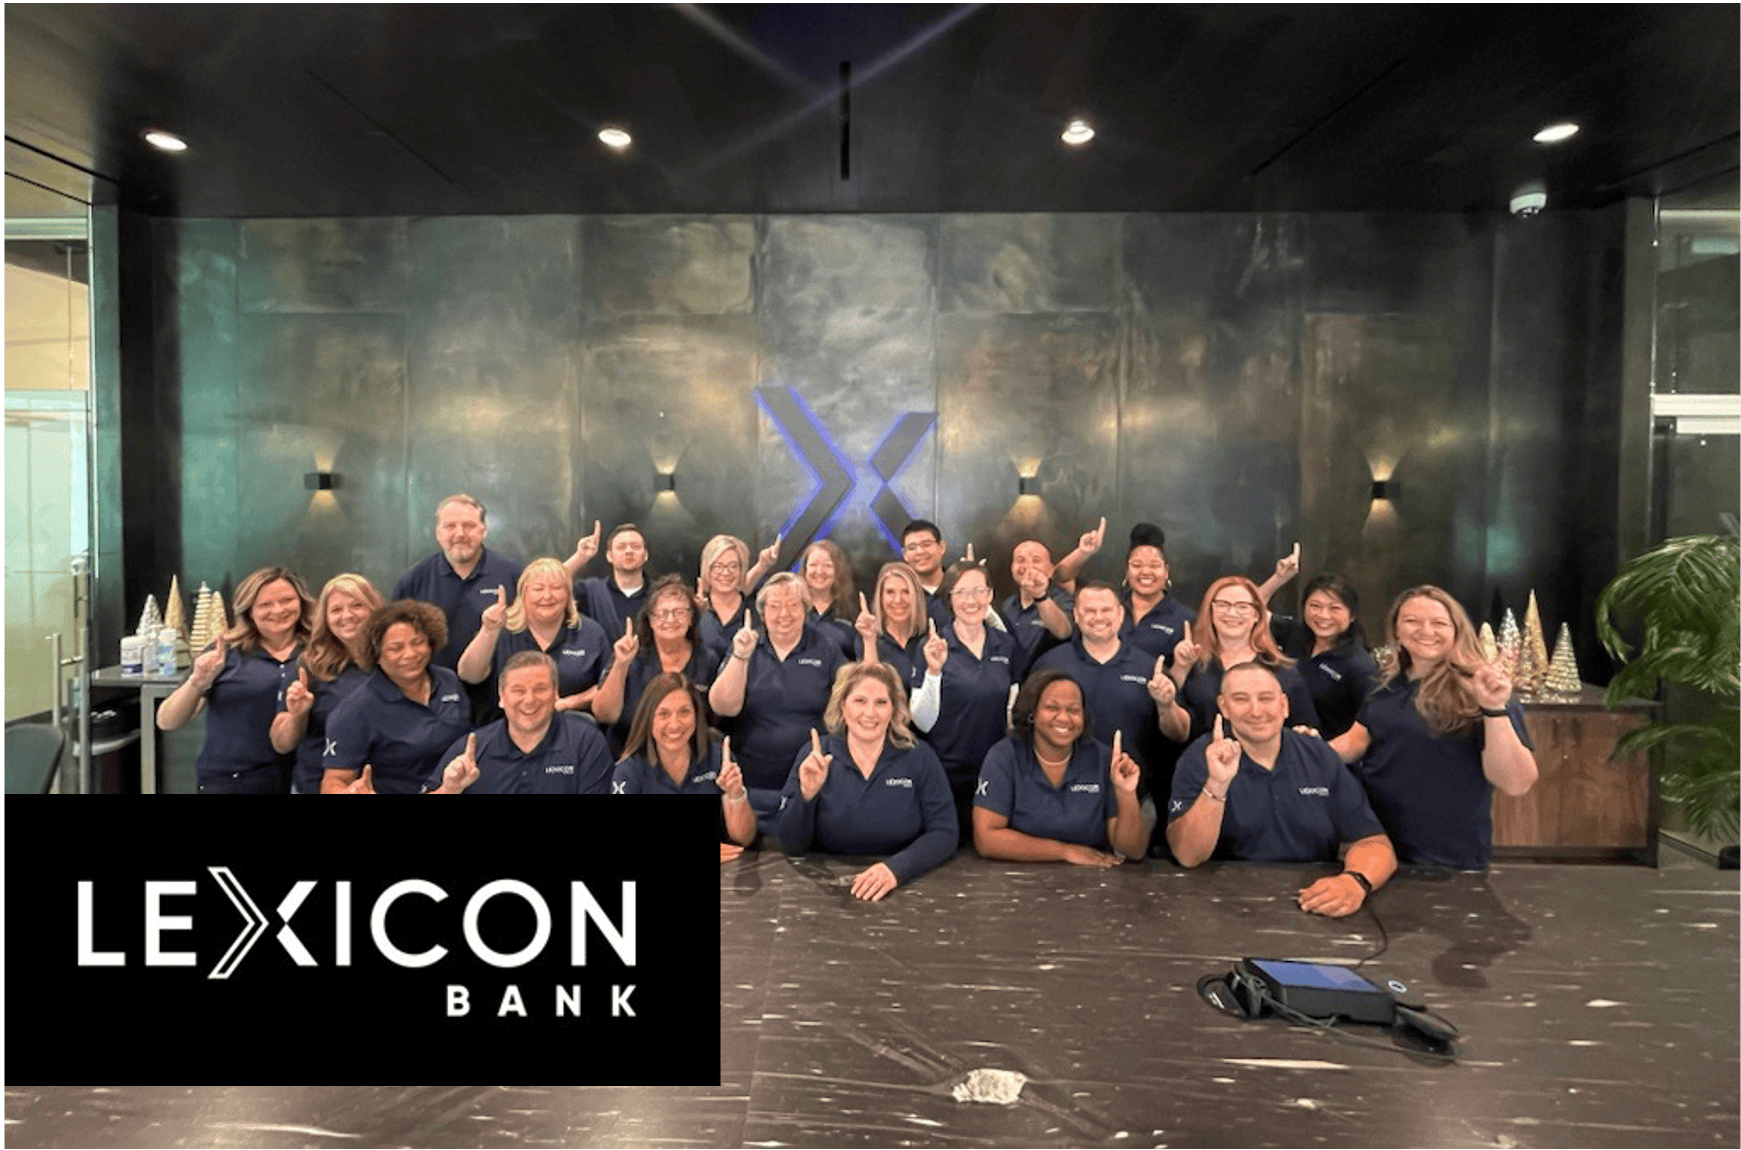 Lexicon Bank Wins Three Gold Awards Including Best Bank in Review-Journal’s 2023 Best Of Las Vegas Reader’s Poll